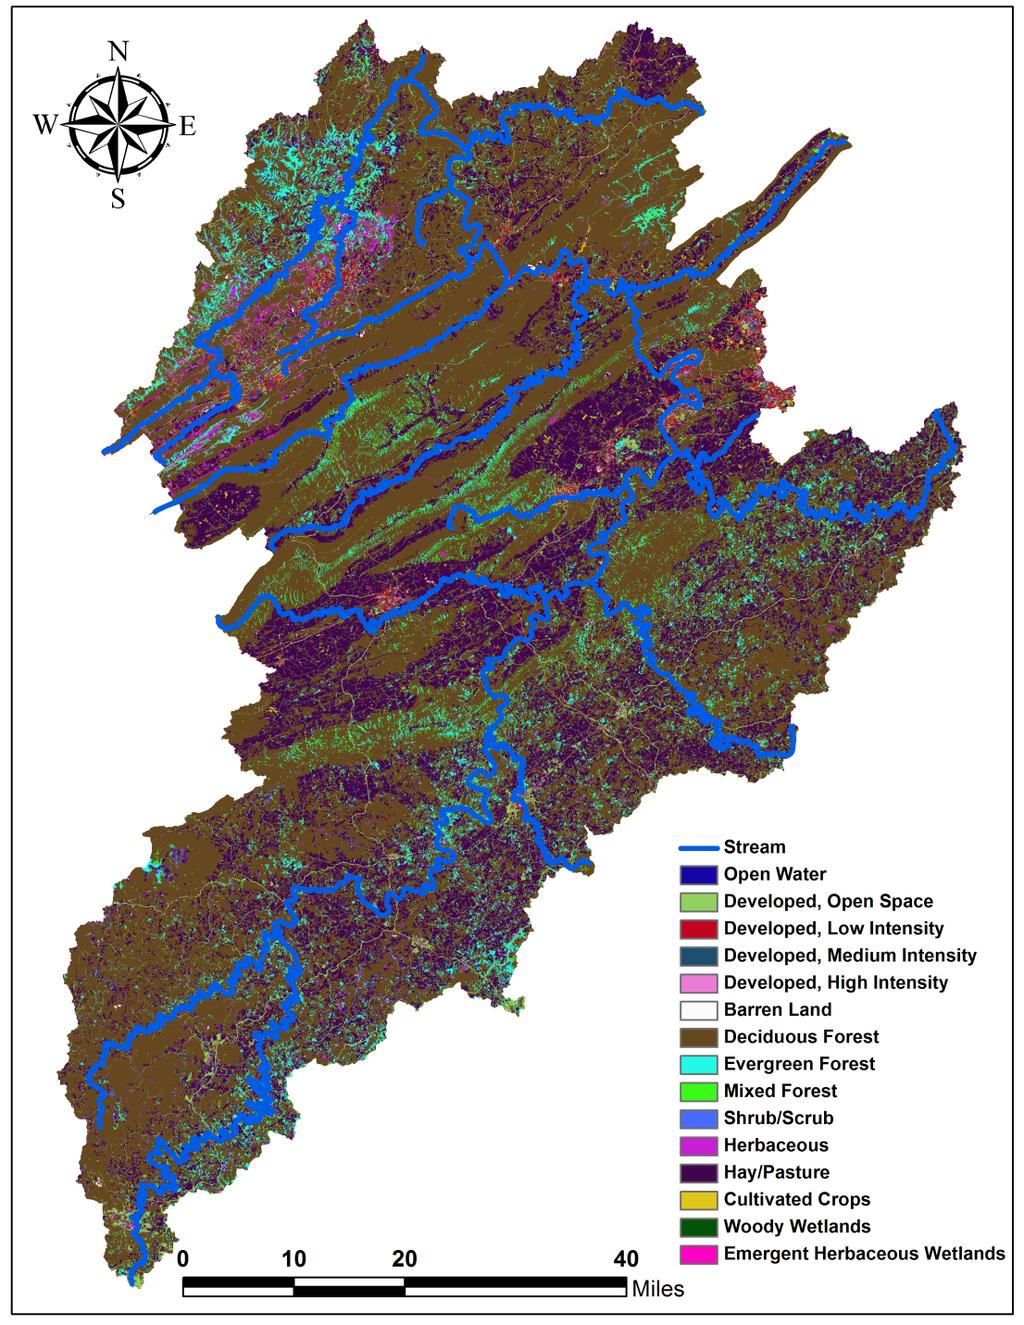 2.1.1 Topography and Vegetation The New River watershed lies in a mountainous region of the Allegheny Plateau, a region which has been deeply dissected by the New, Greenbrier and Bluestone Rivers.